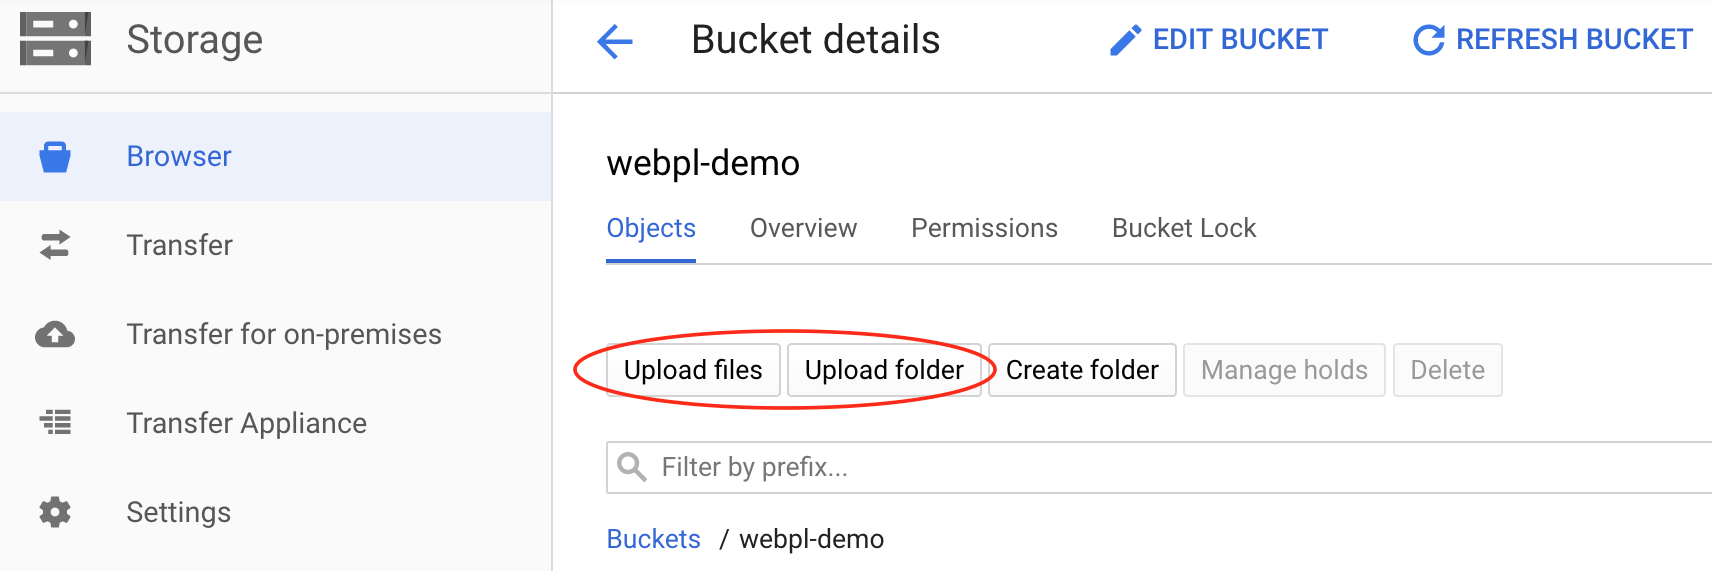 image showing how to upload files and folders to GCP storage